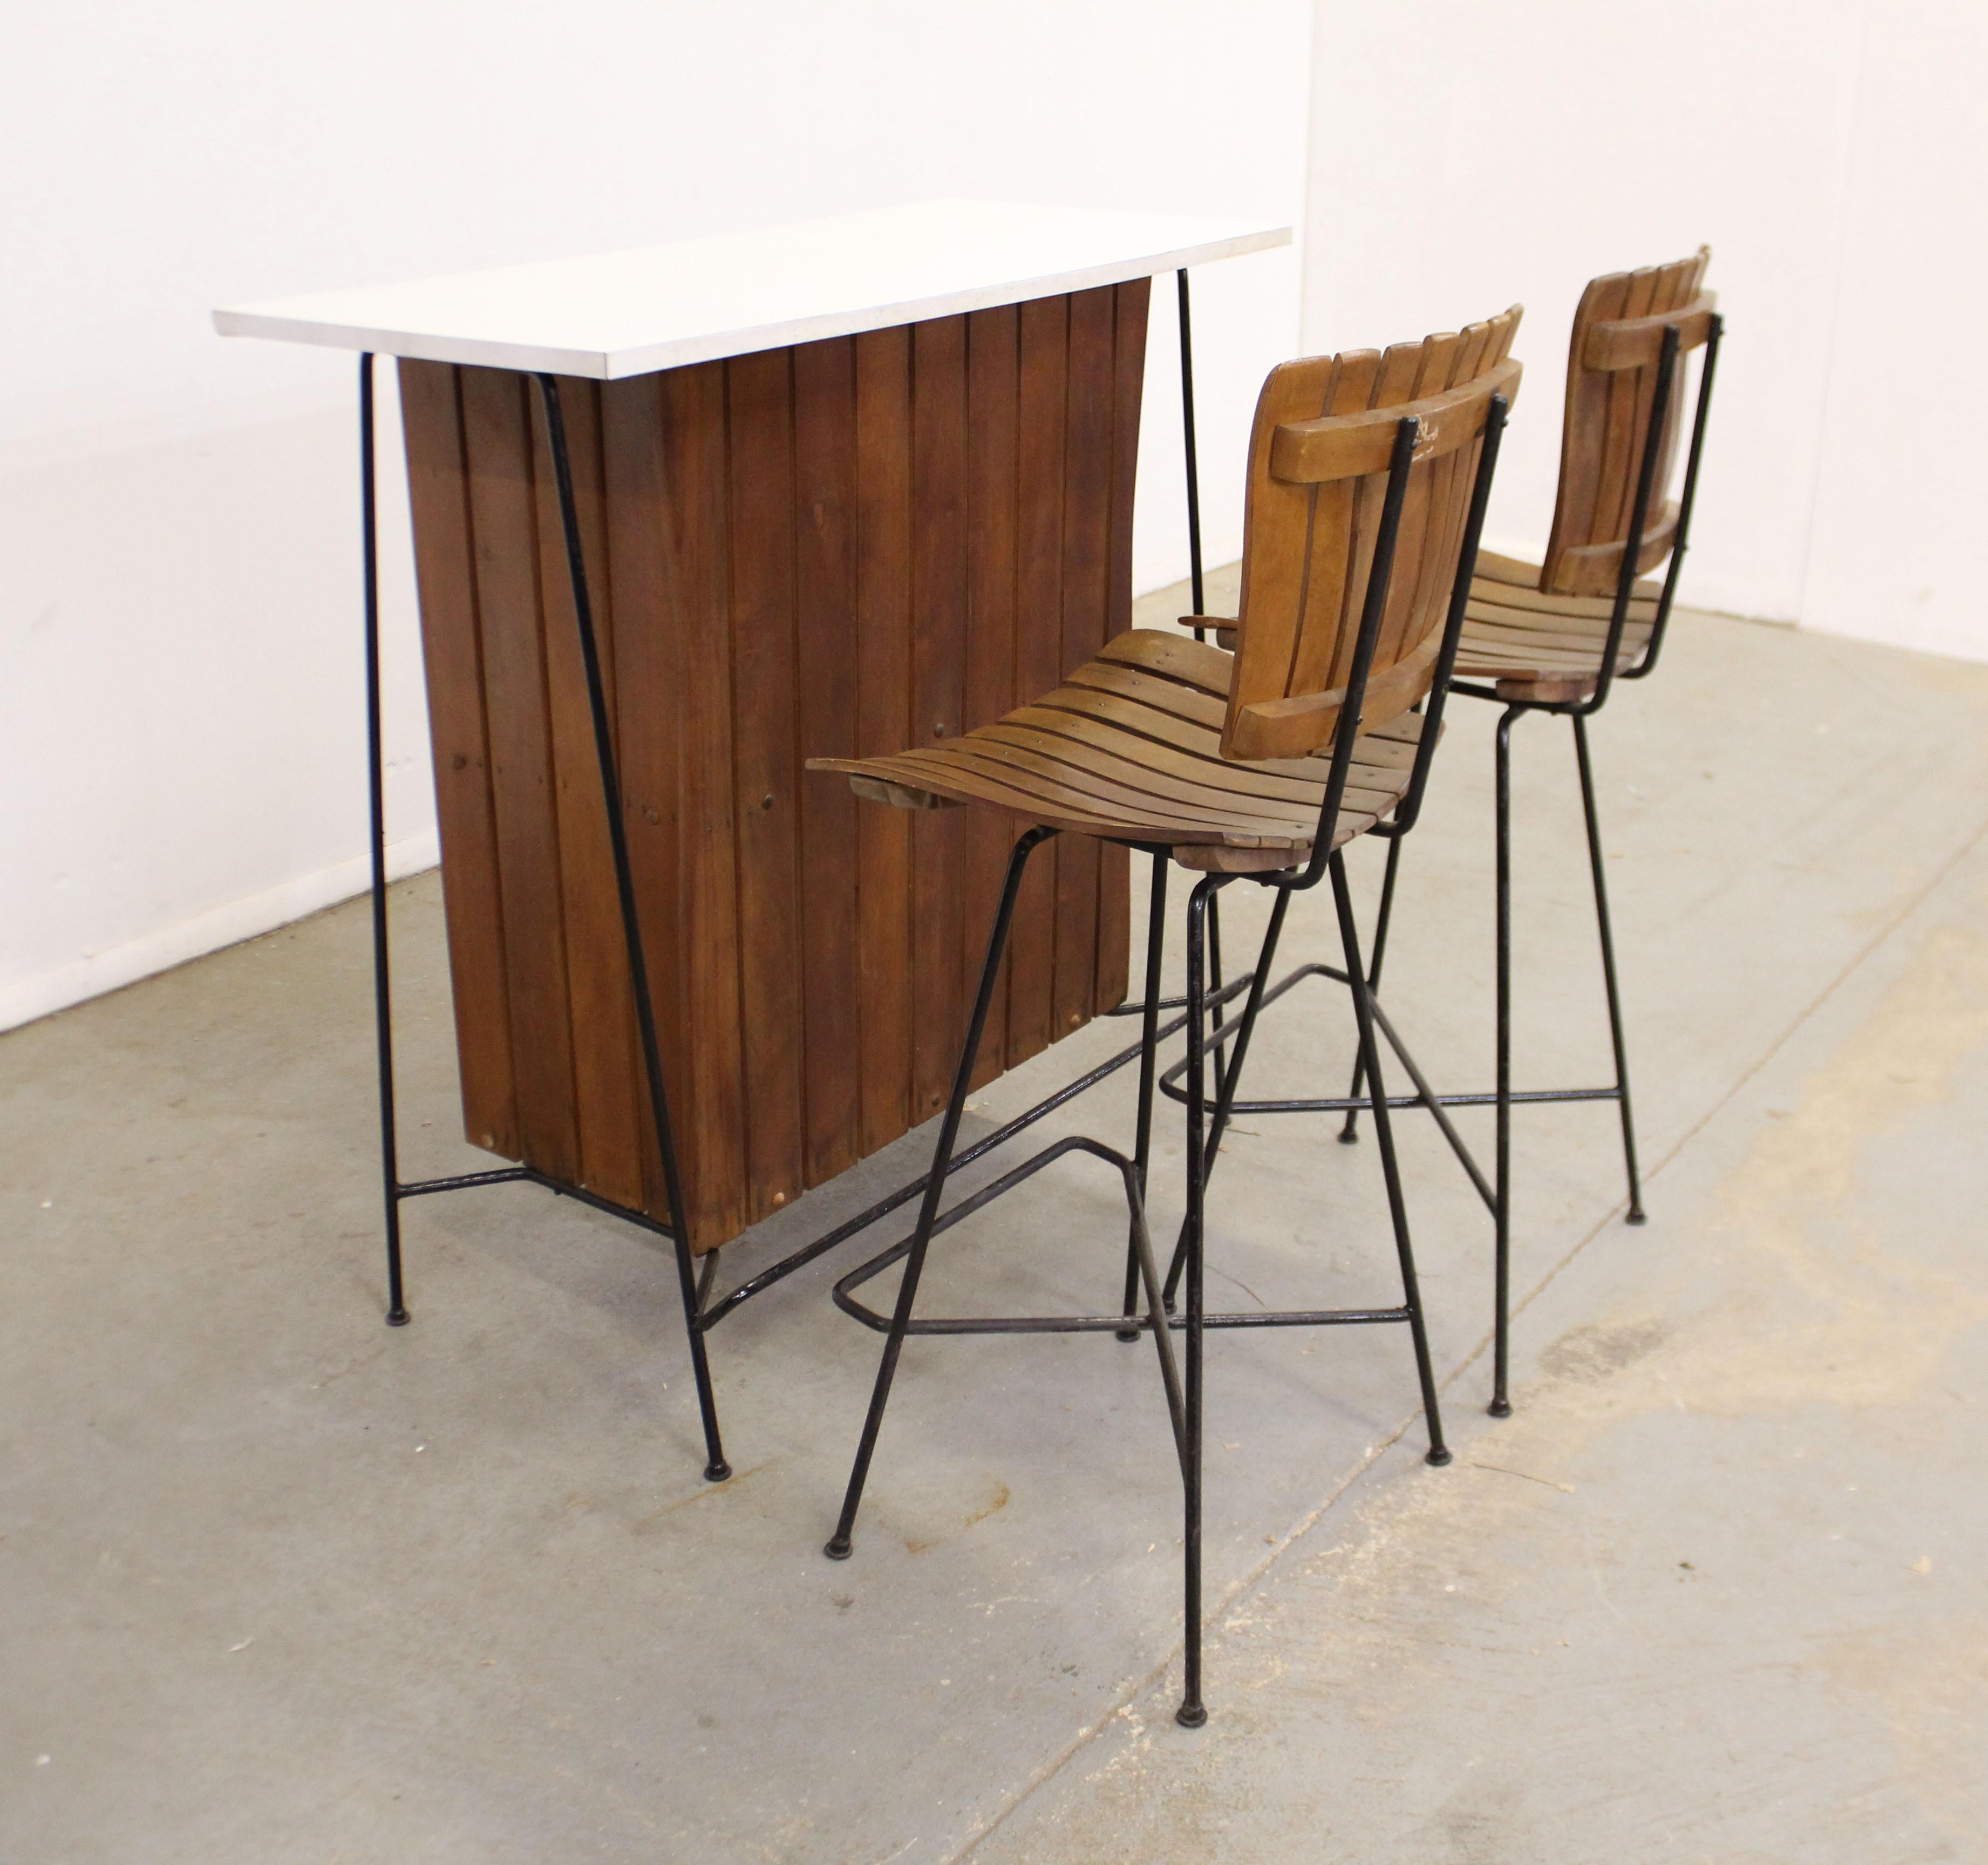 Offered is a 3-piece slat wood dry bar set designed by Arthur Umanoff. Includes two slat stools and a dry bar. The bar has a Formica top with rear shelving and wrought iron legs and foot rests. The set is in very good condition for its age, showing